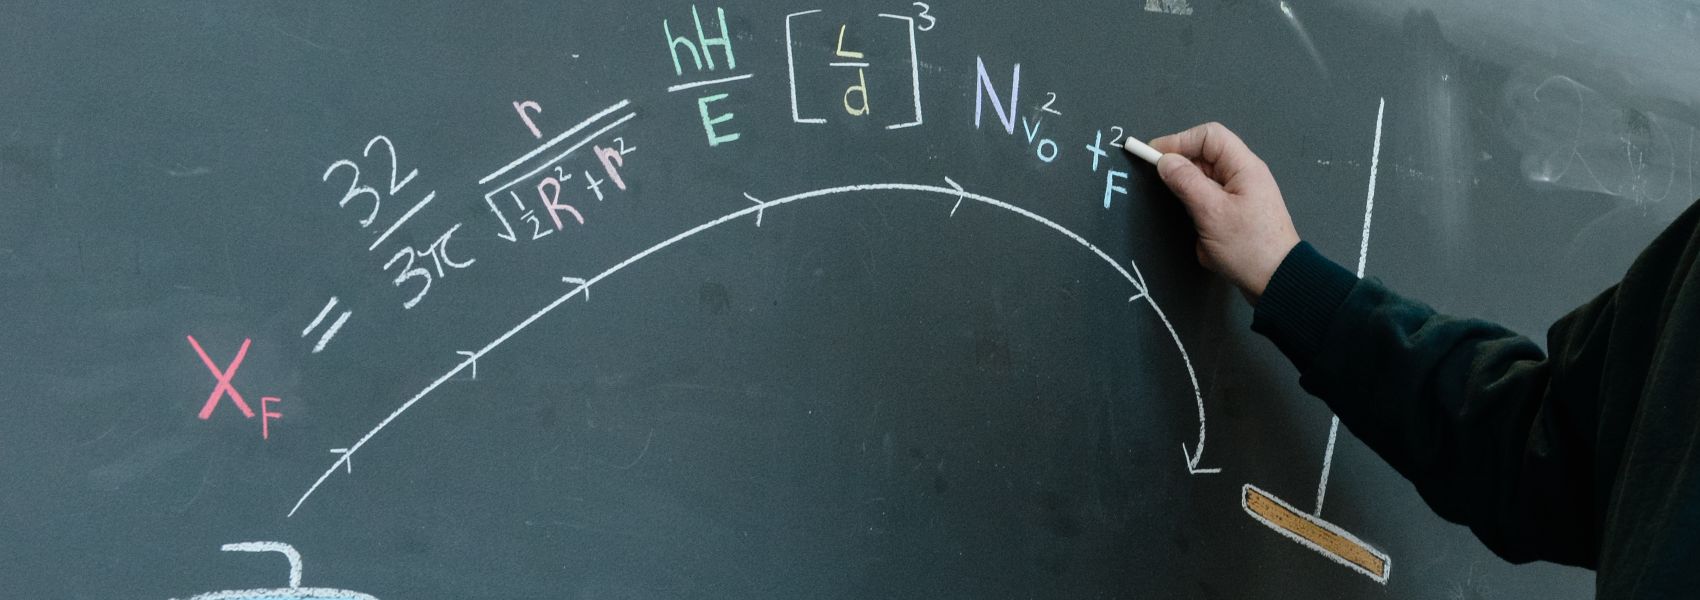 Student writing an equation on a chalkboard